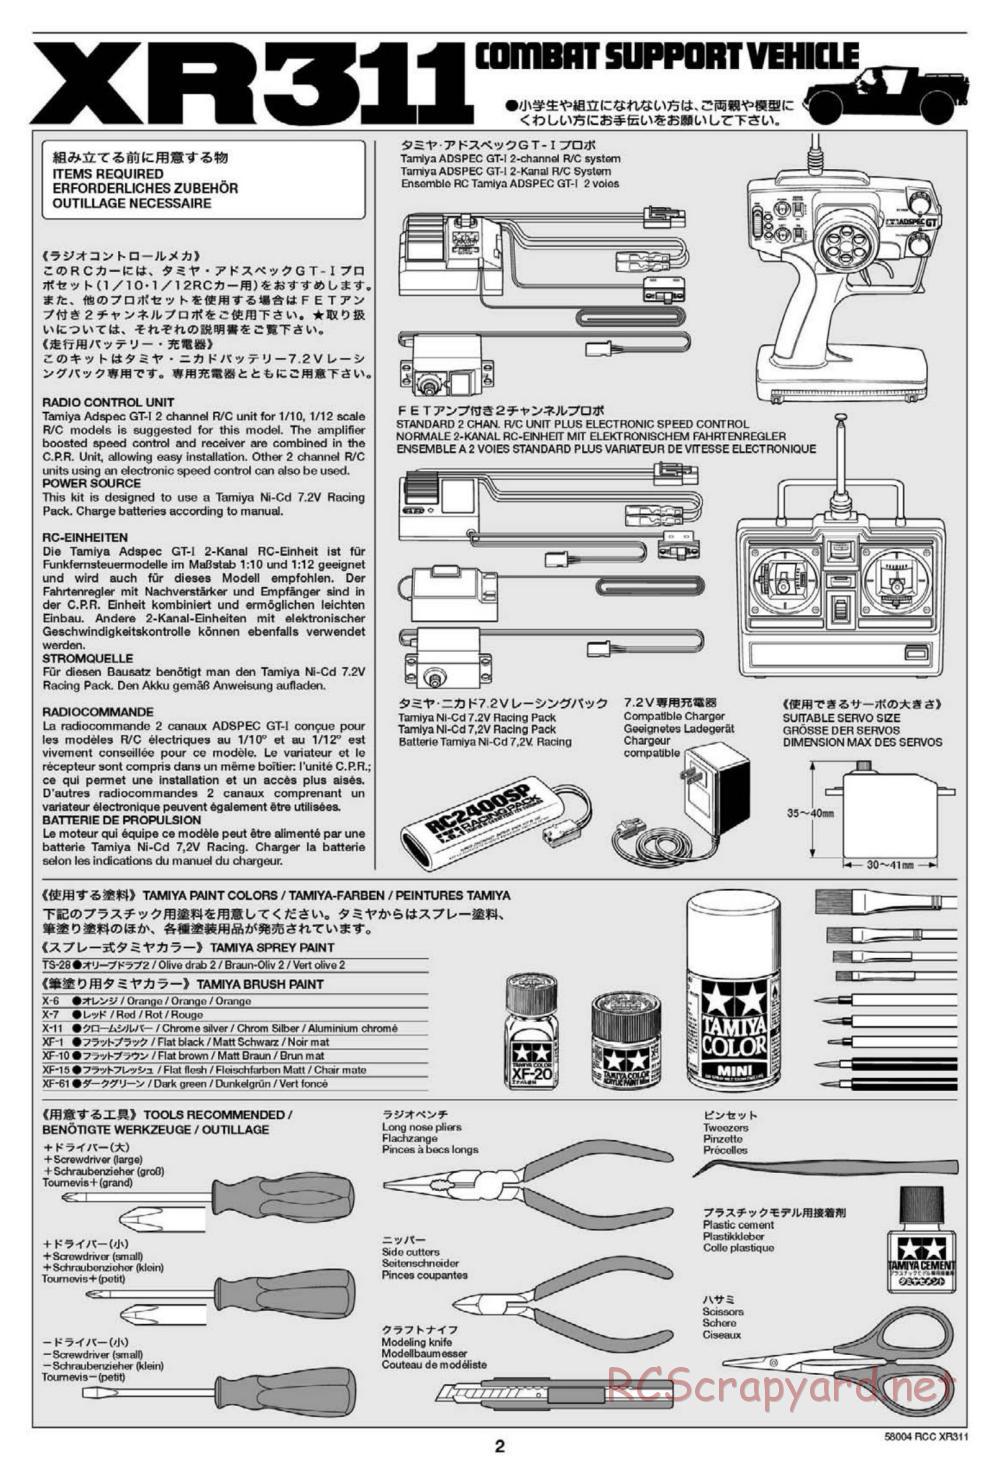 Tamiya - XR311 Combat Support Vehicle (2012) Chassis - Manual - Page 2